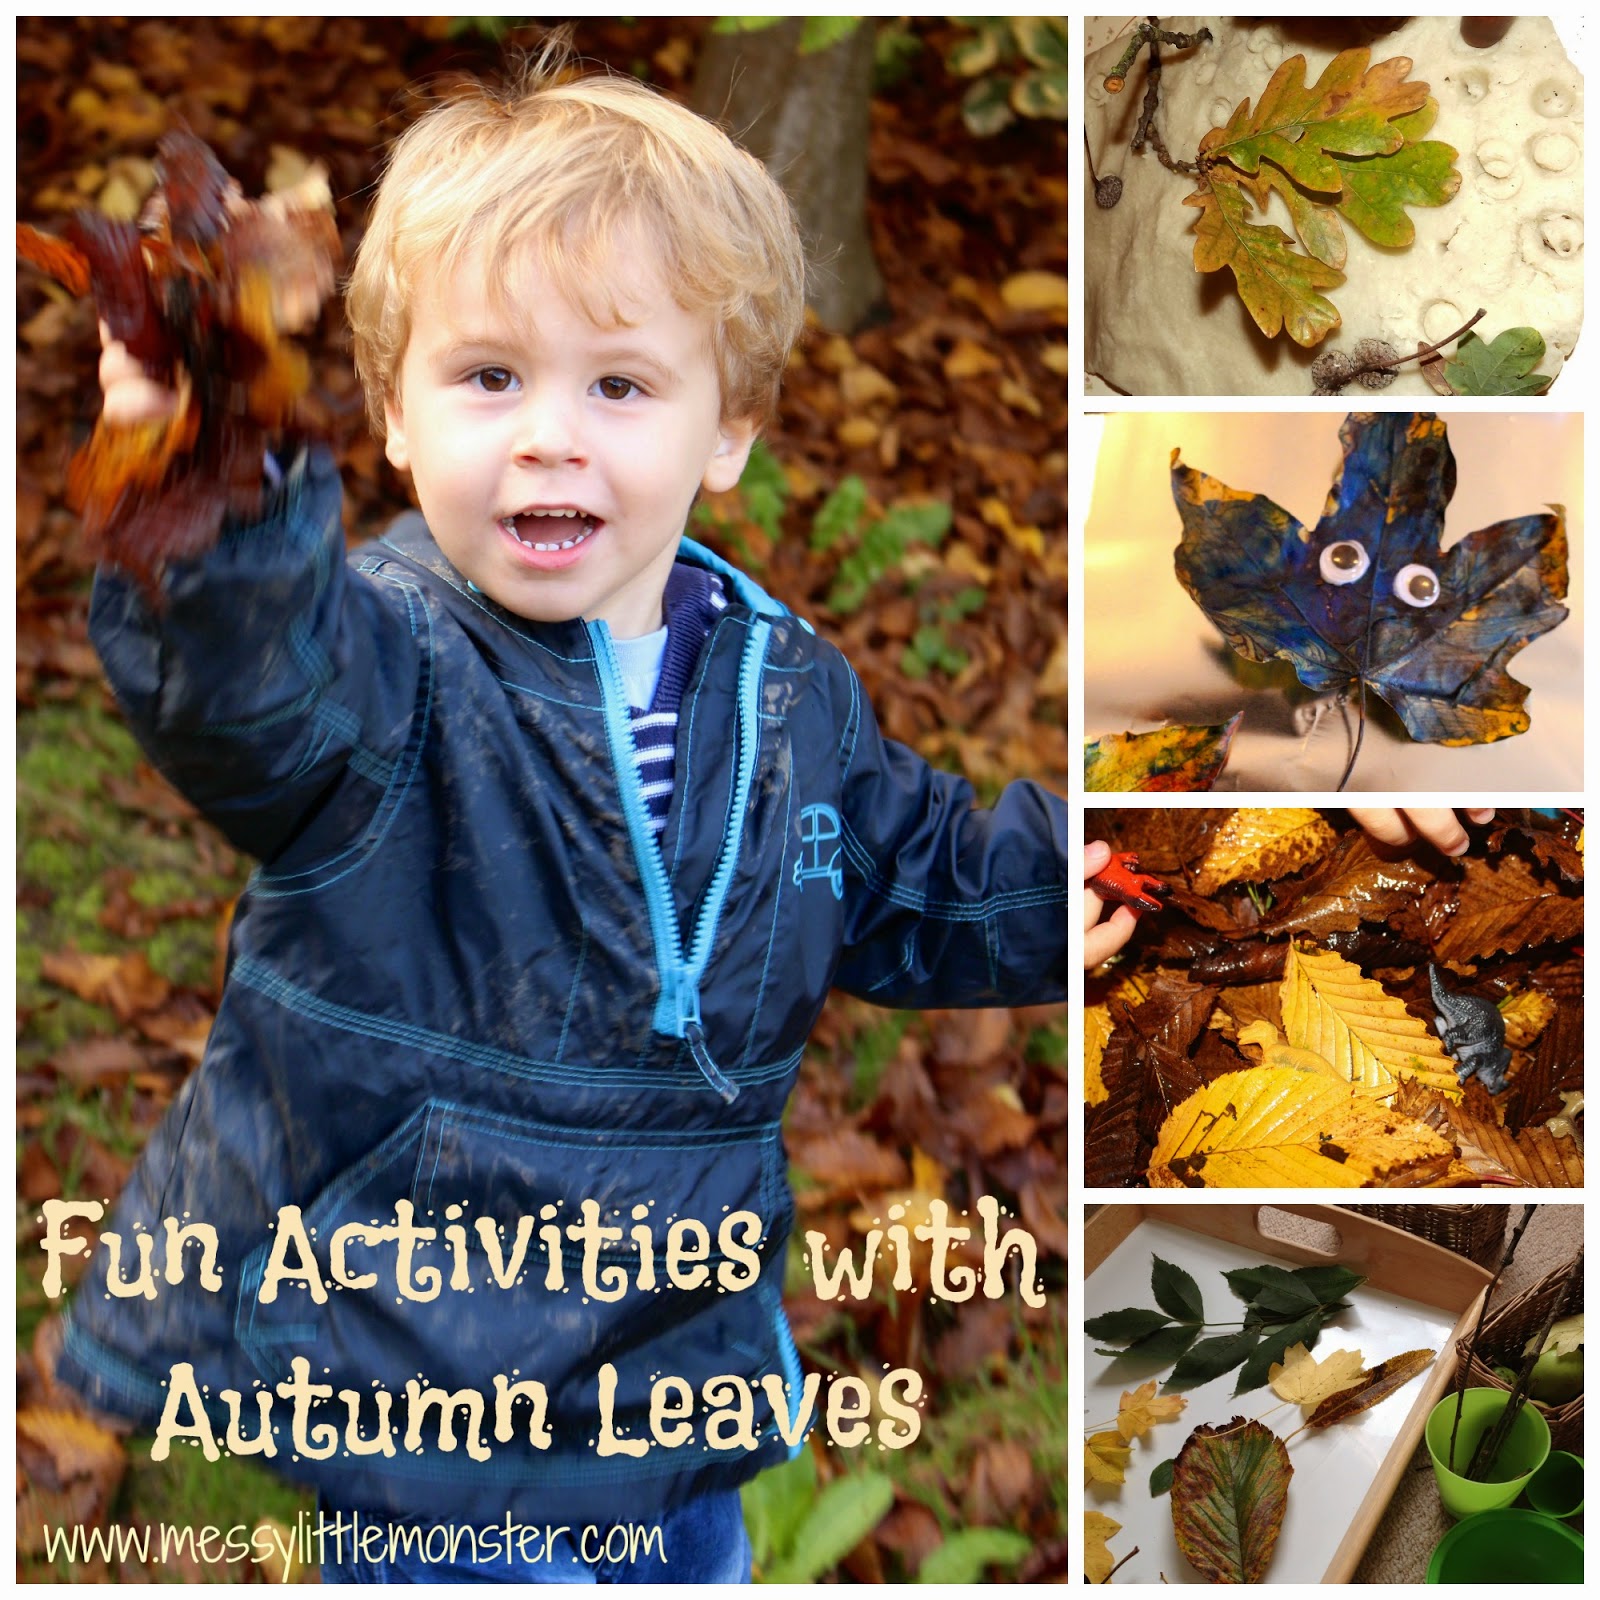 http://www.messylittlemonster.com/2014/11/fun-activities-with-autumn-leaves.html